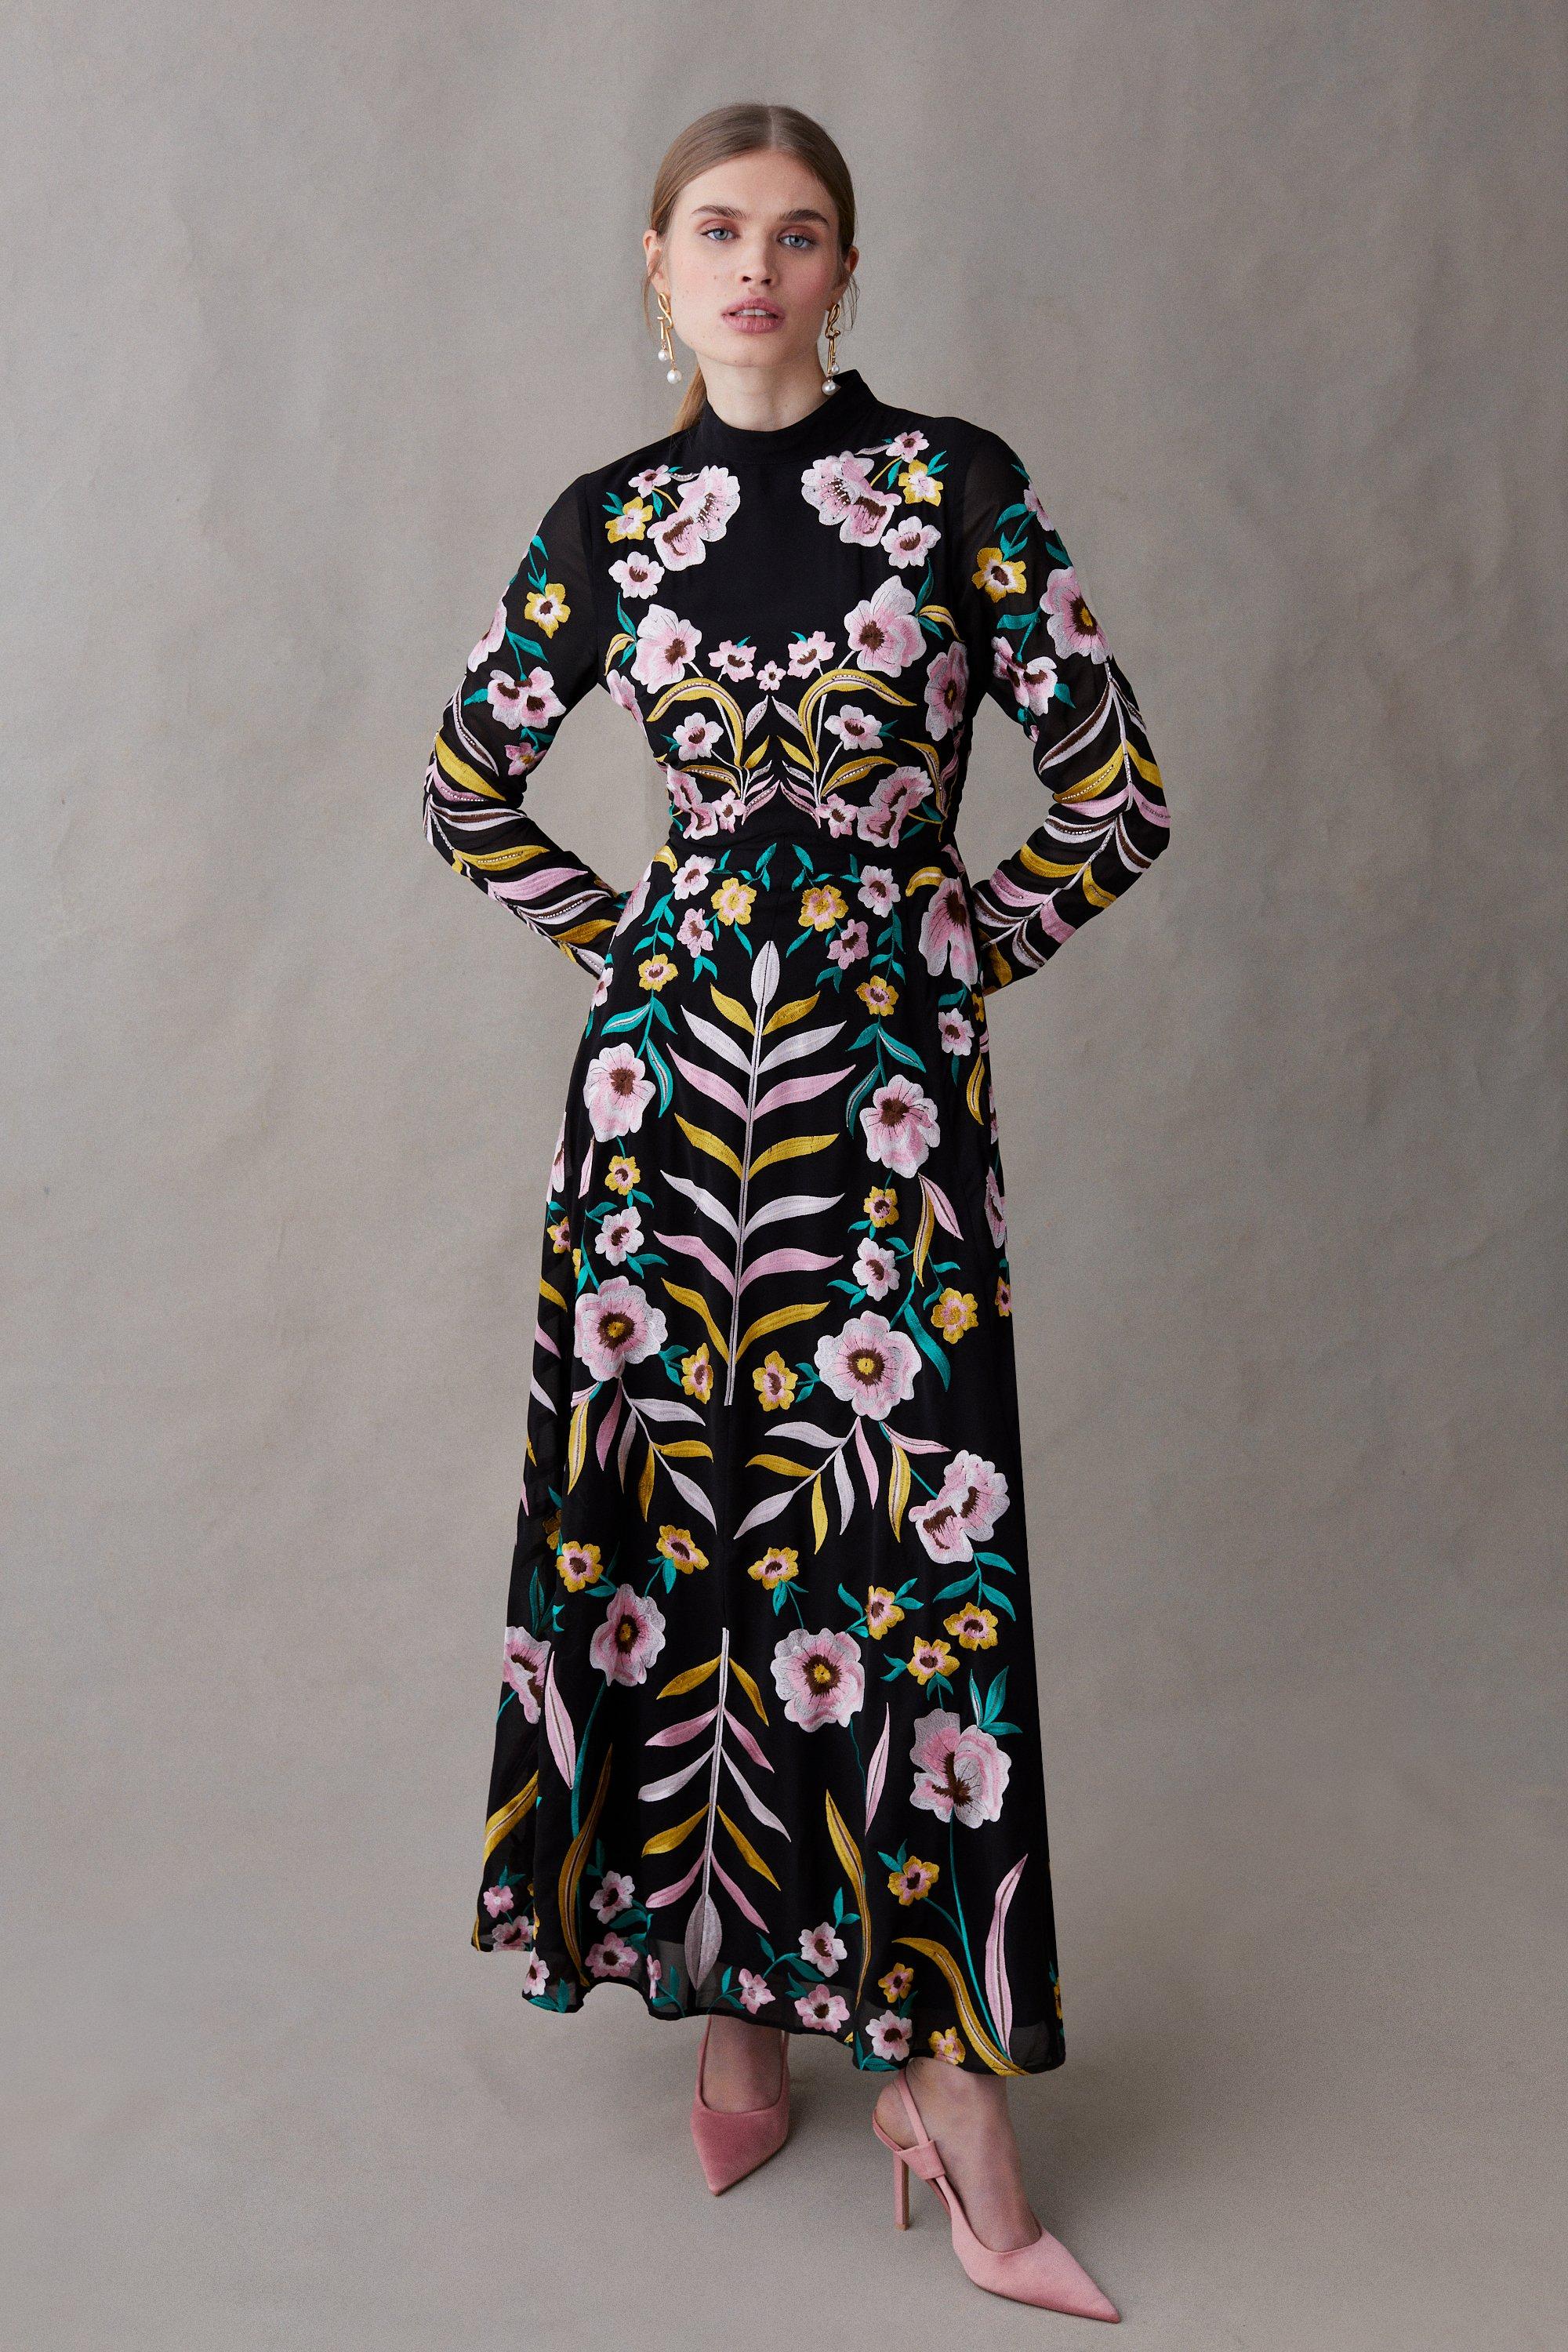 Statement Mirrored Floral Embroidered Maxi Dress - Black